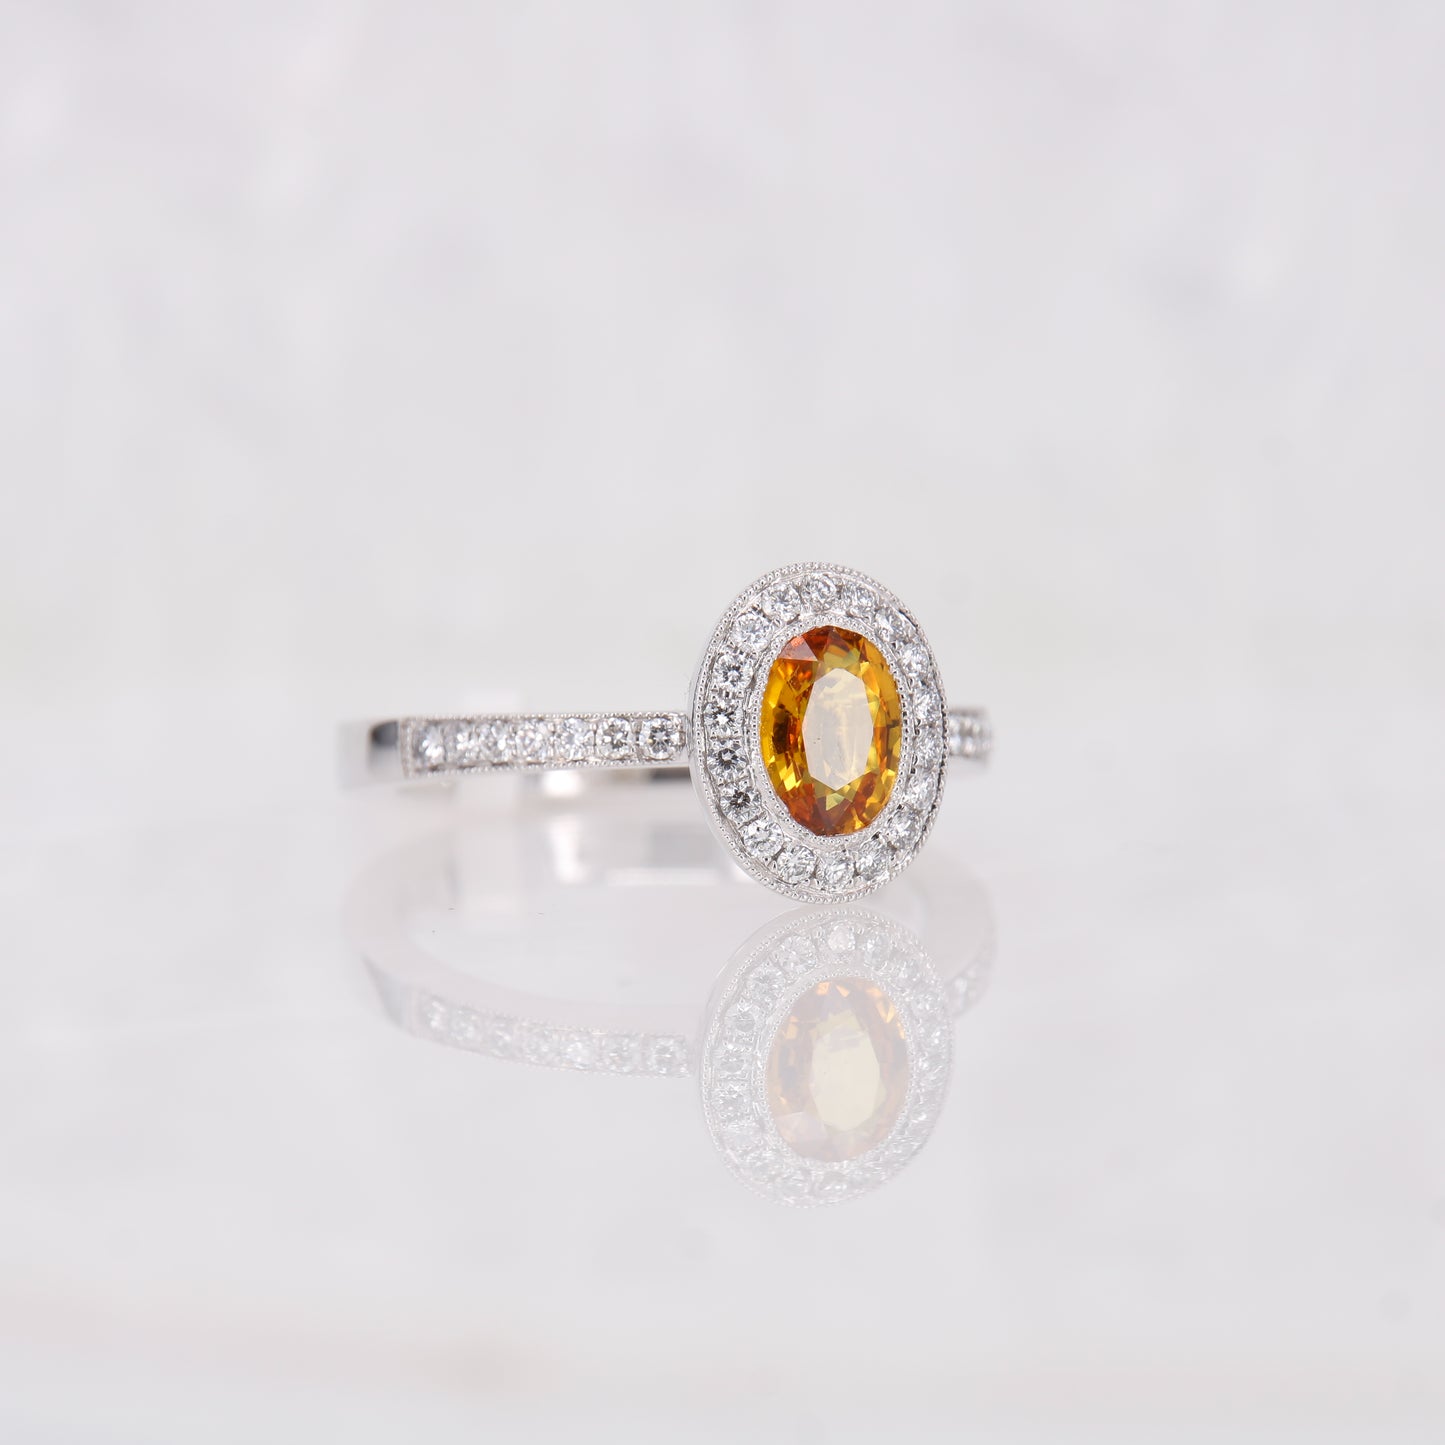 Yellow Sapphire oval engagement ring. Yellow orange sapphire surrounded by a halo of diamonds. 